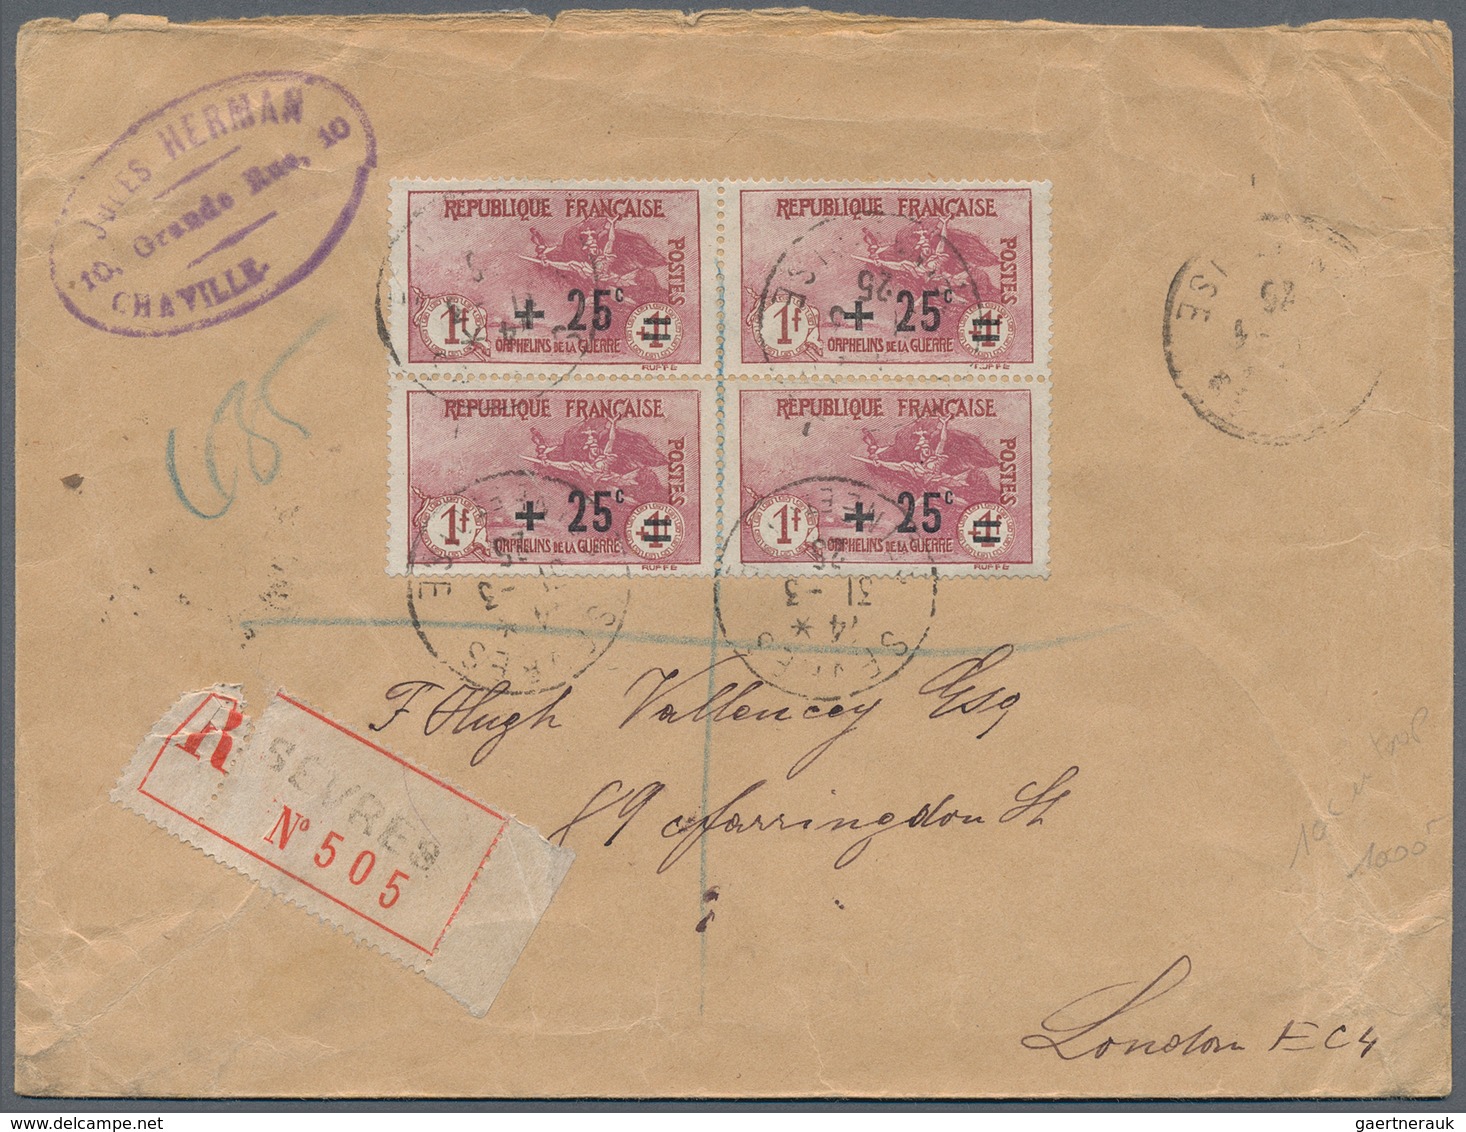 Frankreich: 1900/1960, absolutely awesome collection of blocks of four on entires bearing 450 envelo